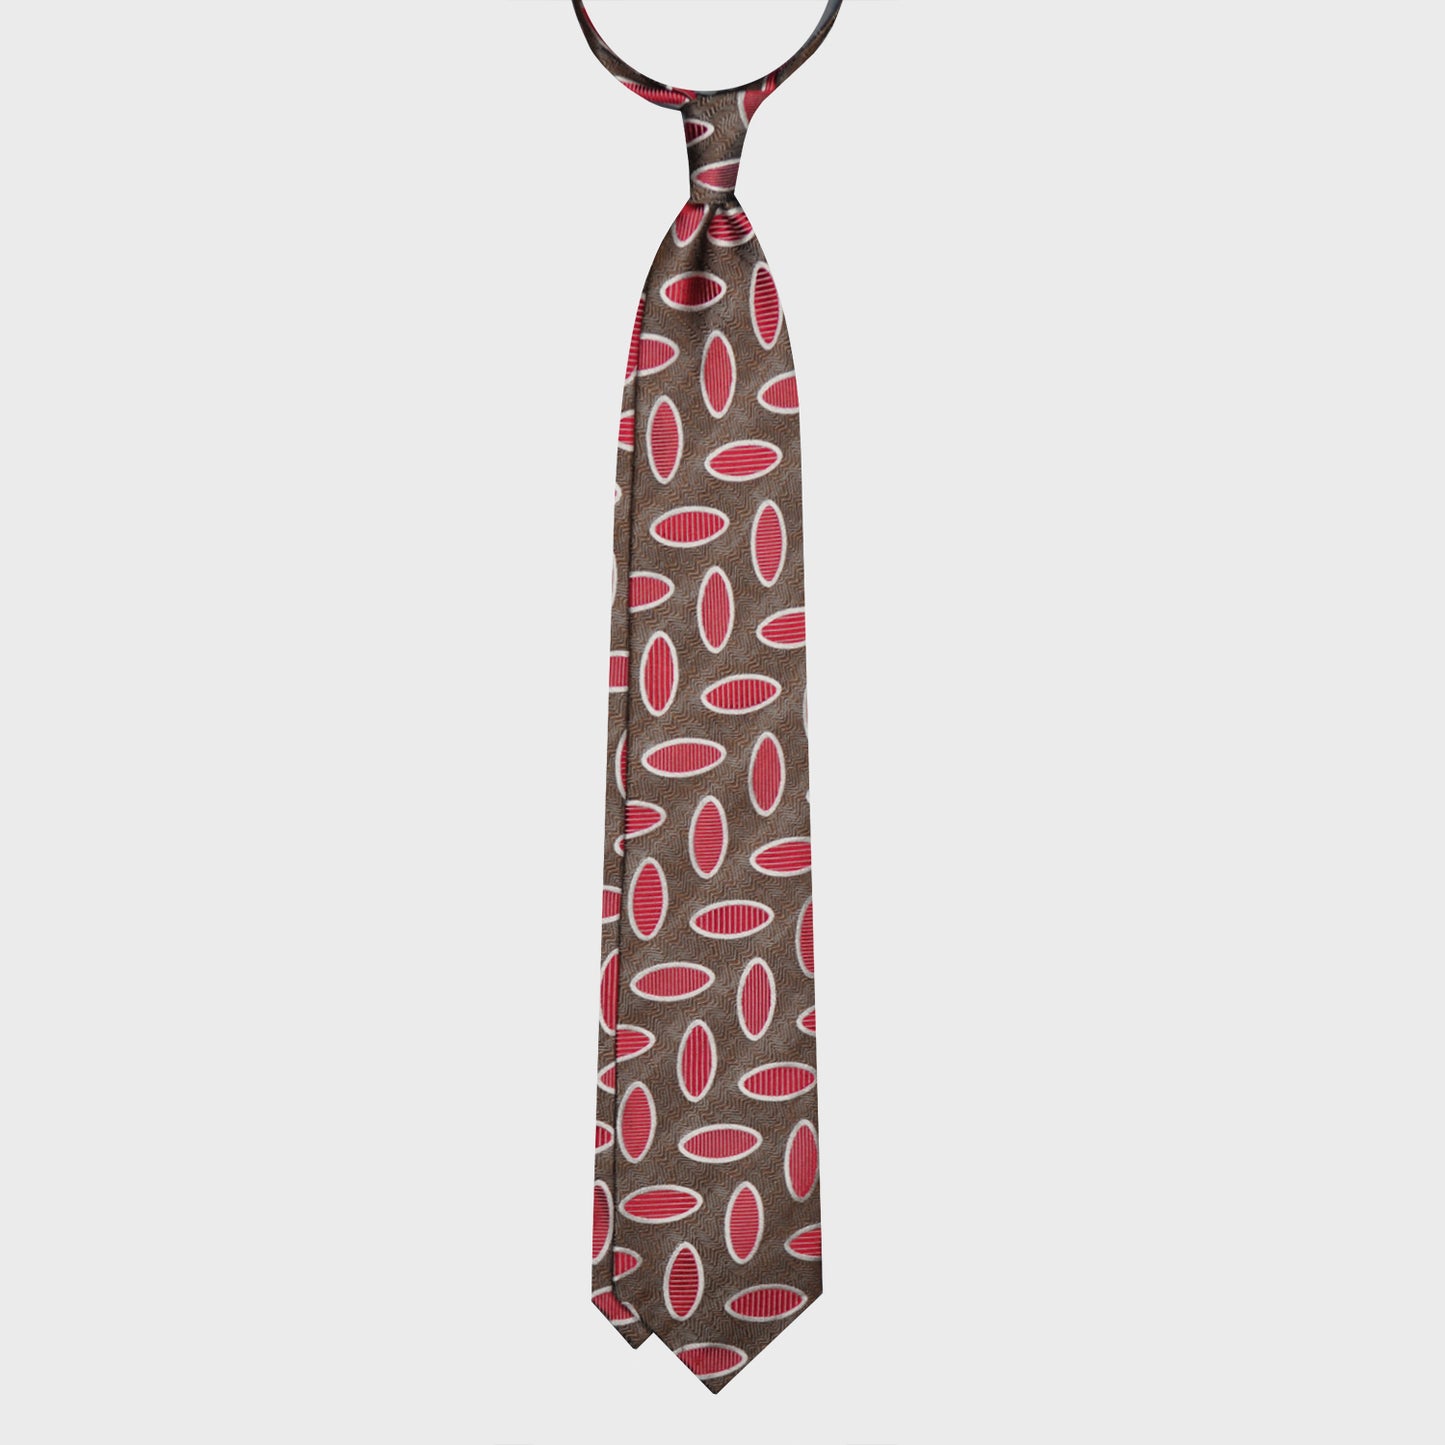 Load image into Gallery viewer, F.Marino Silk Tie 3 Folds Ovals Raspberry-Wools Boutique Uomo
